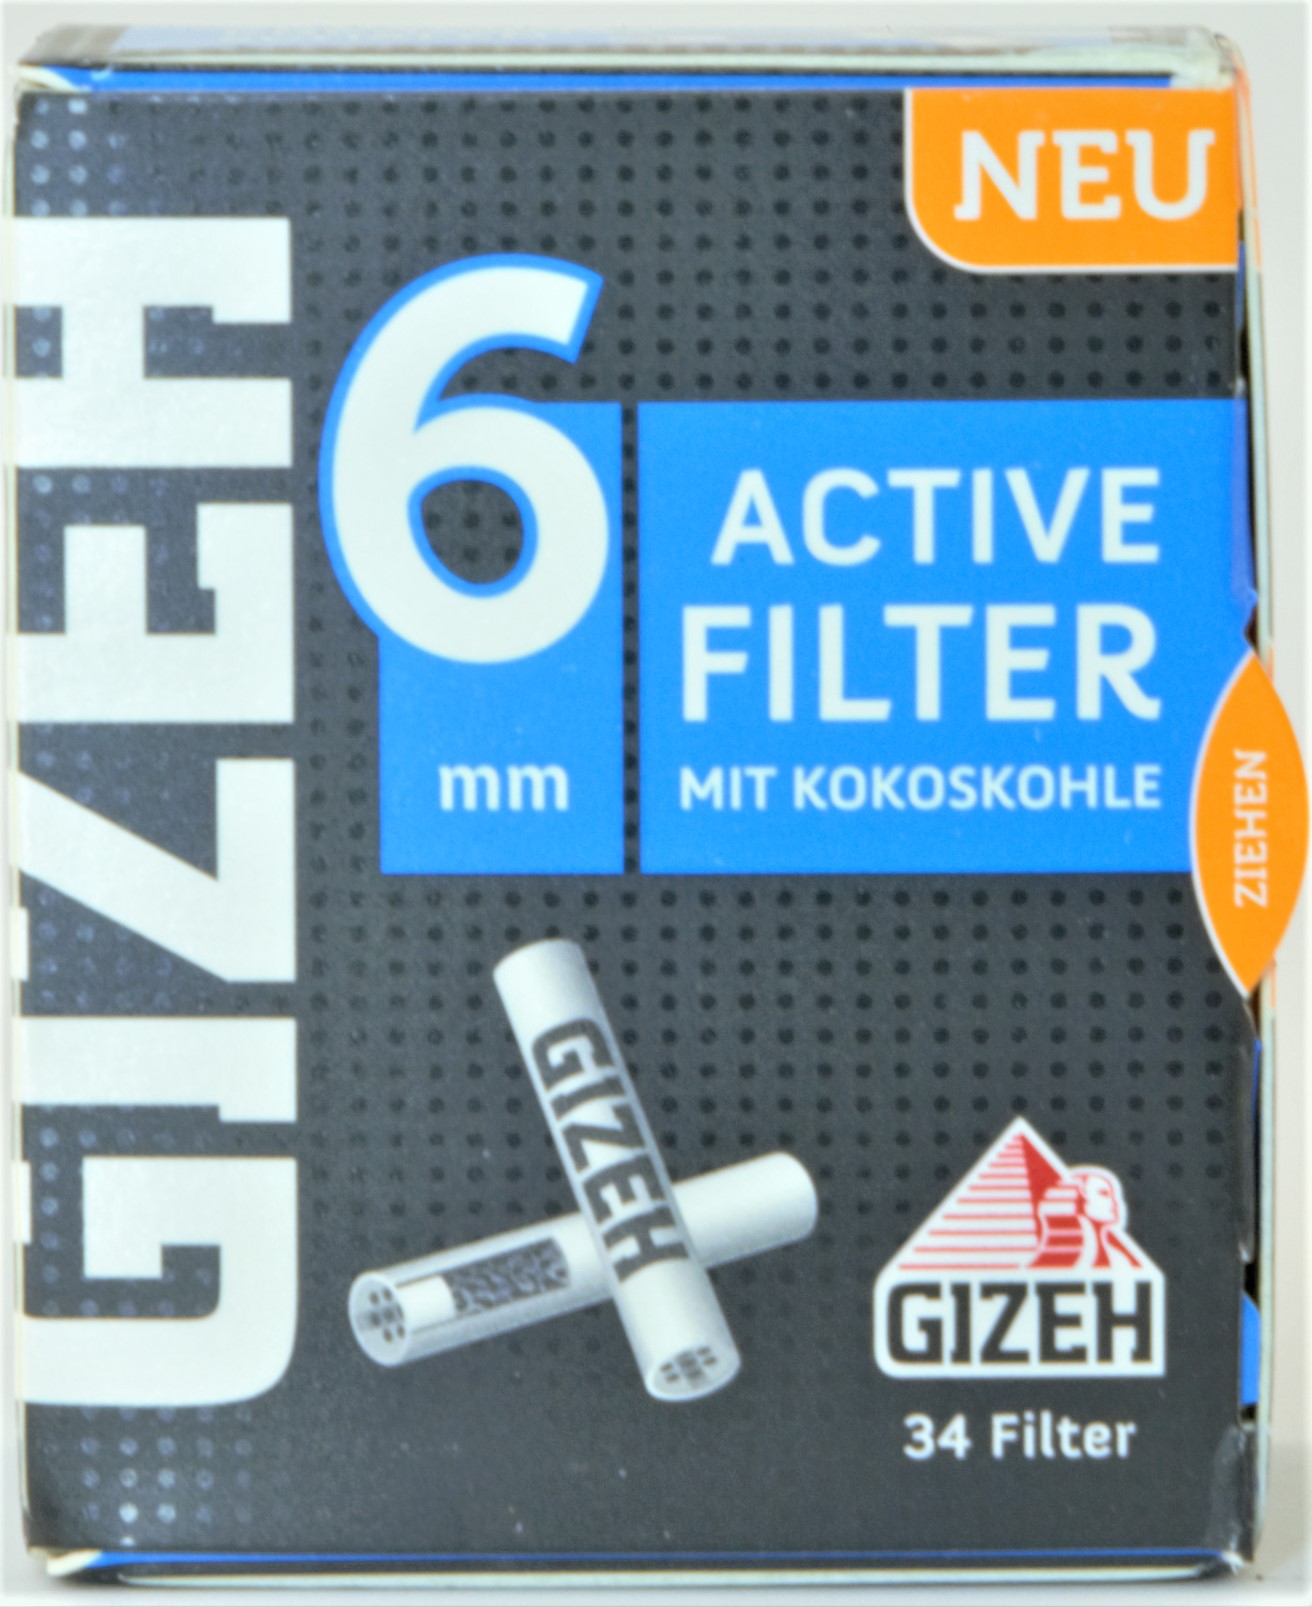 DISPLAY 10x34 Gizeh Active Filter 6mm